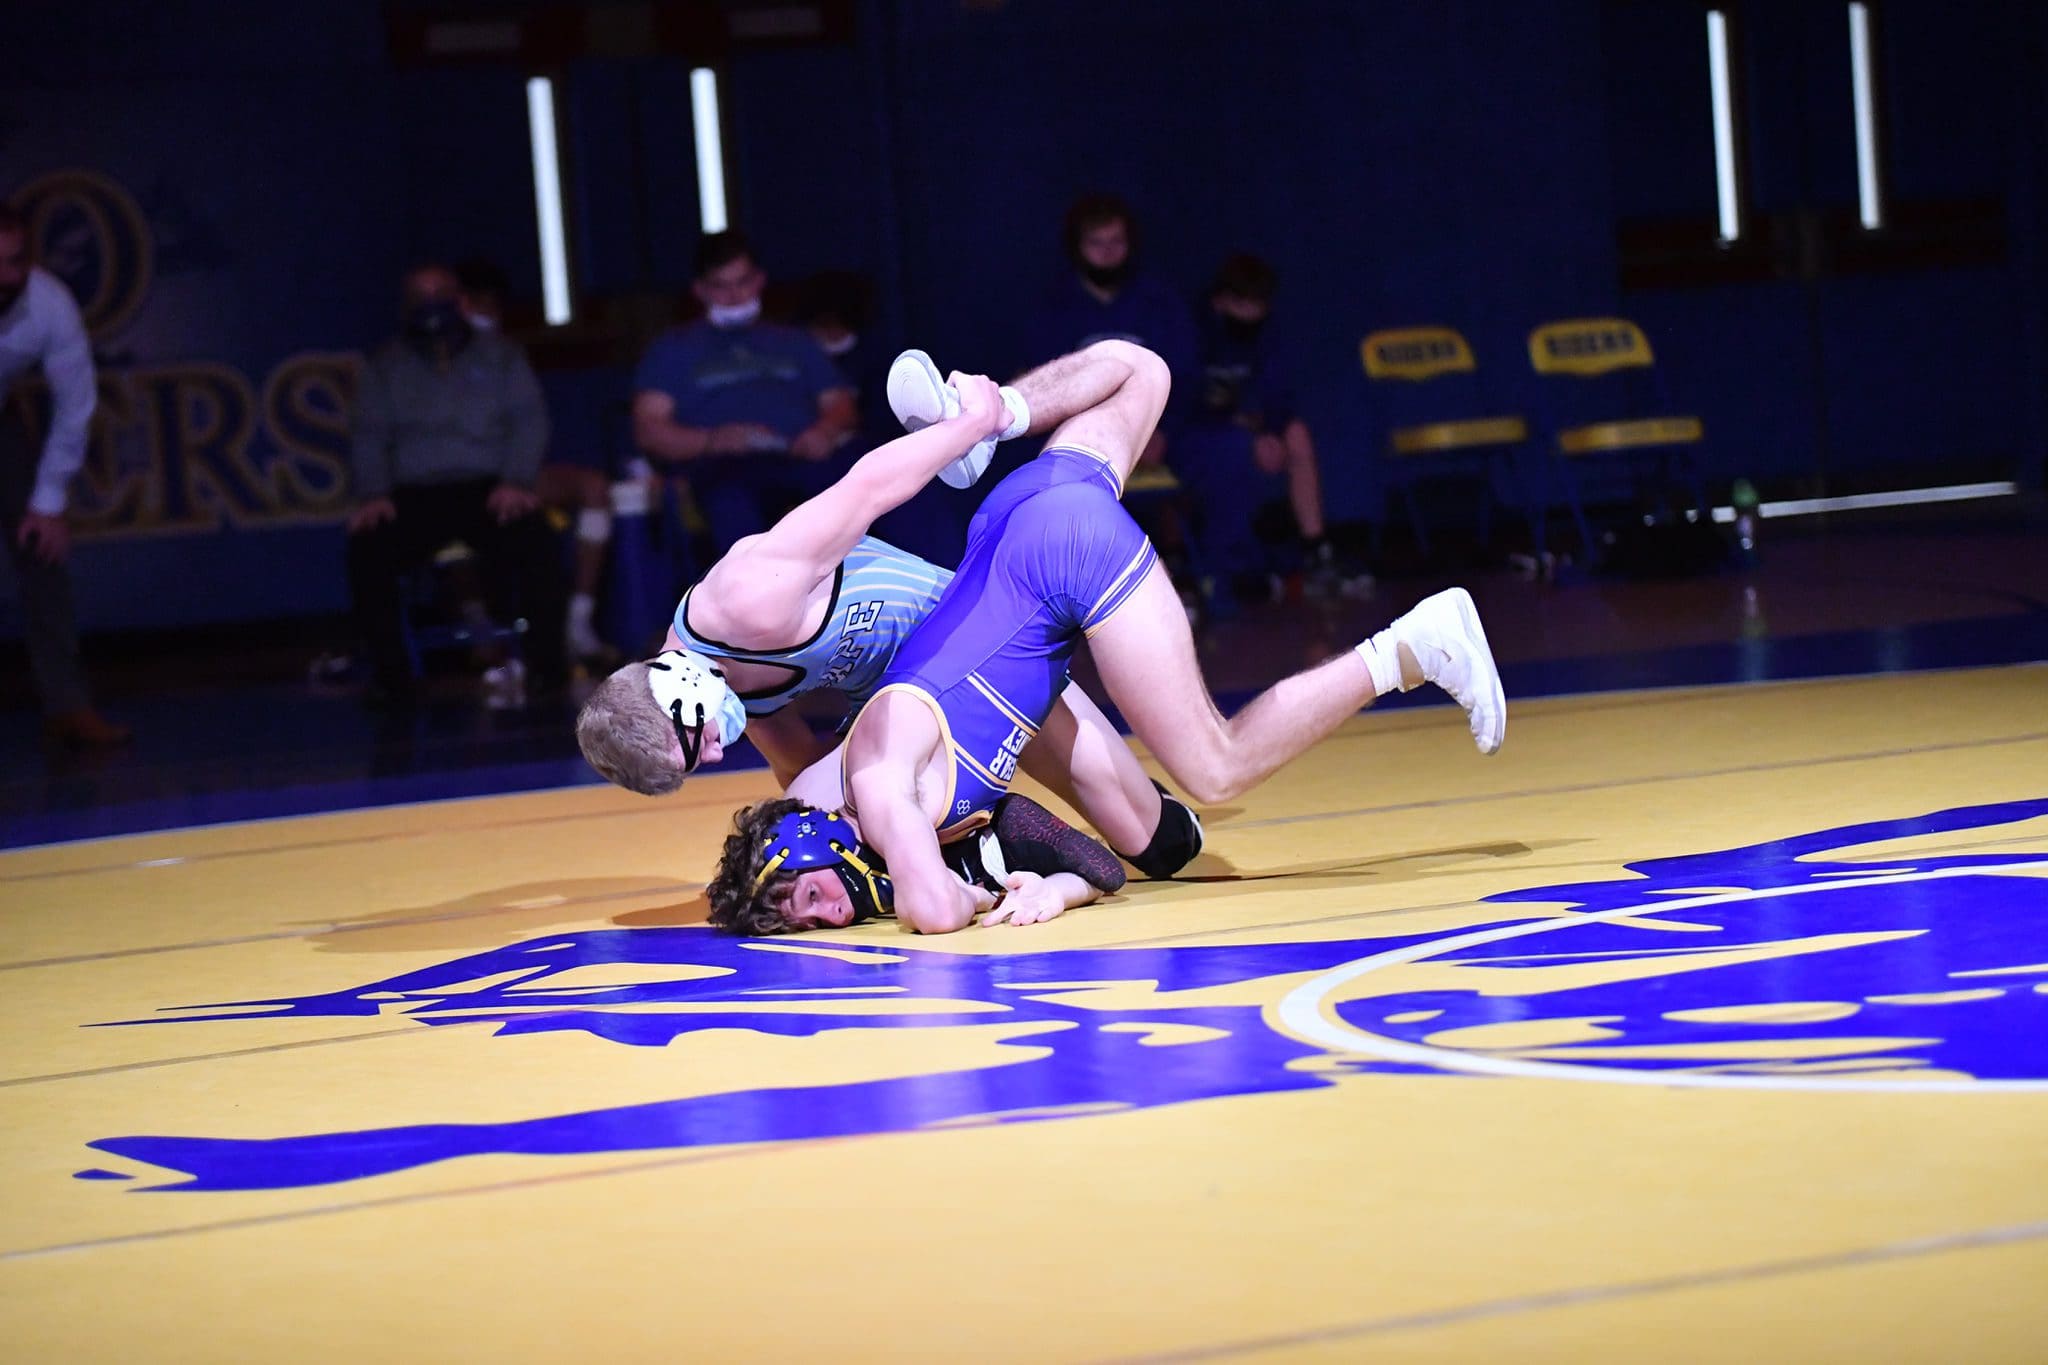 Cape Henlopen Pins Their Way to Victory Over Caesar Rodney